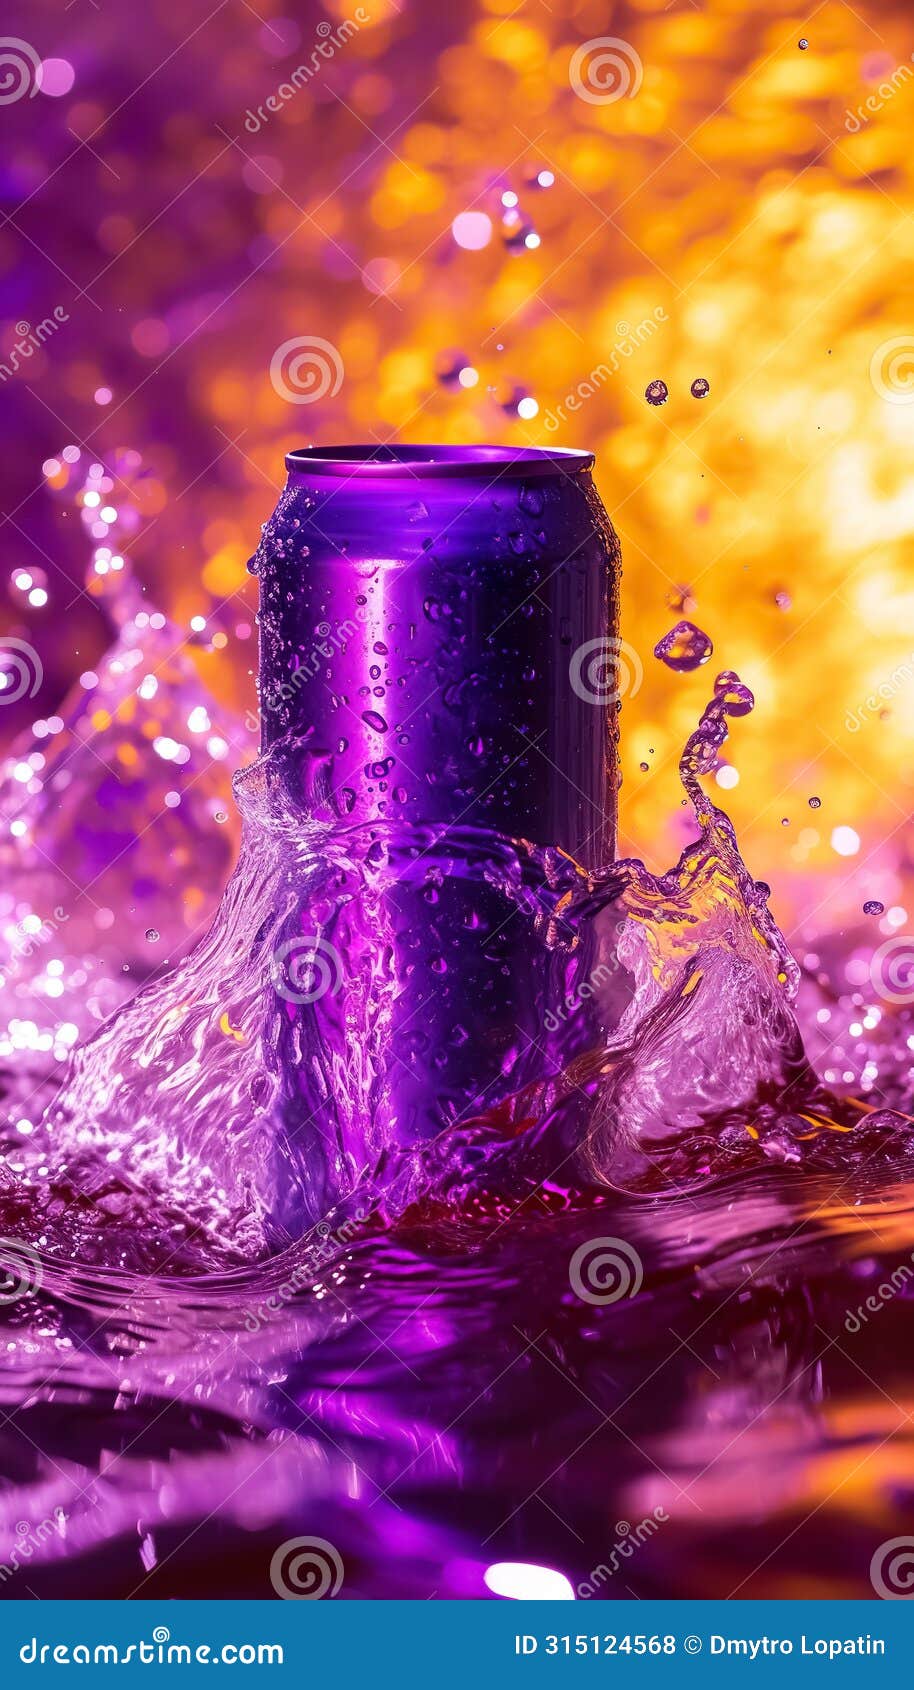 cold colorful metallic soda can in splashing water and with drops of condensate, fresh drink in liquid, advertising mock